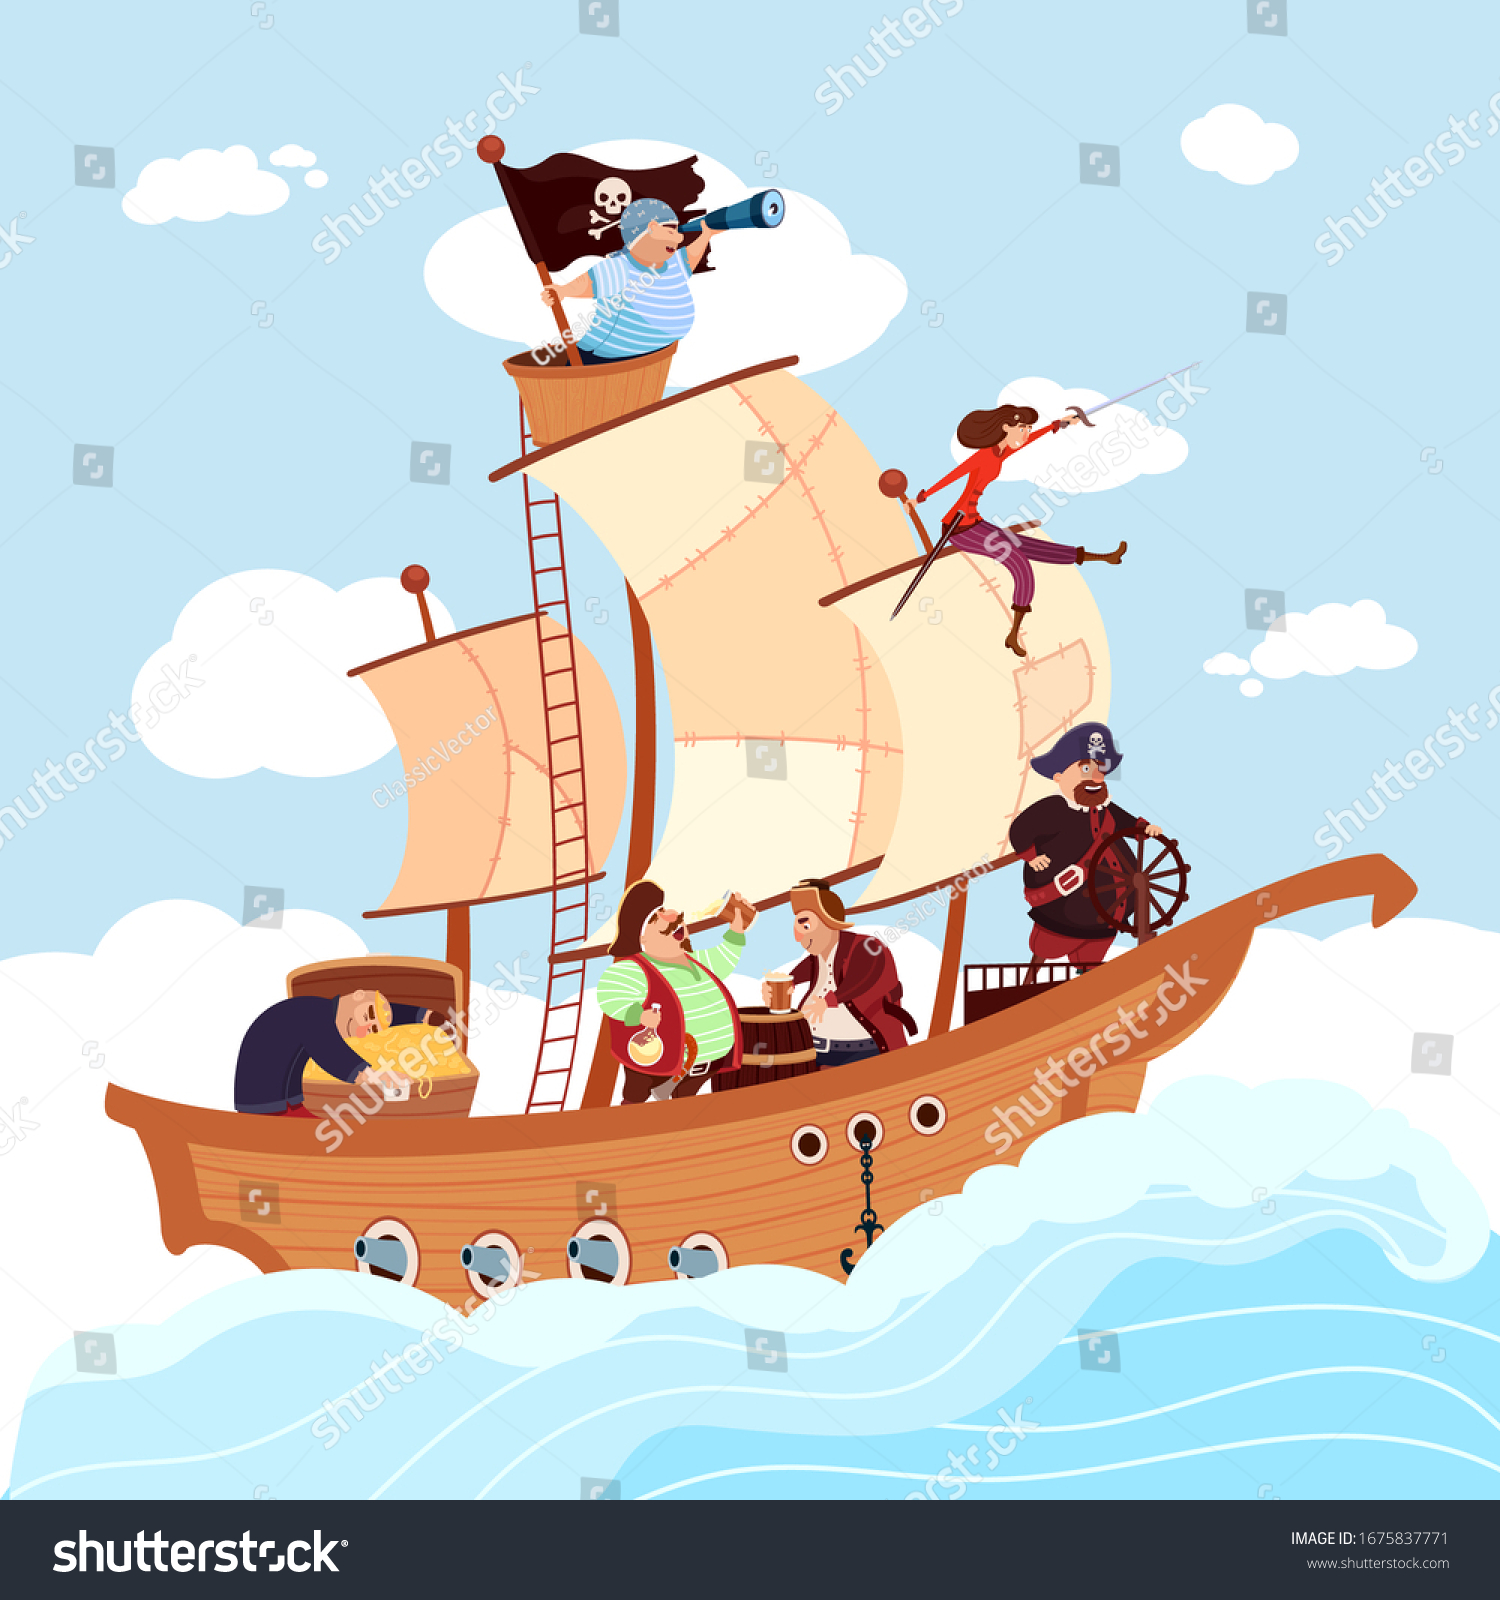 SVG of Pirates on wooden ship under white sails in sea. Buccaneer boat. Filibuster corsair male and female characters with saber, sword, chest full of gold, treasures. Vector cartoon illustration svg